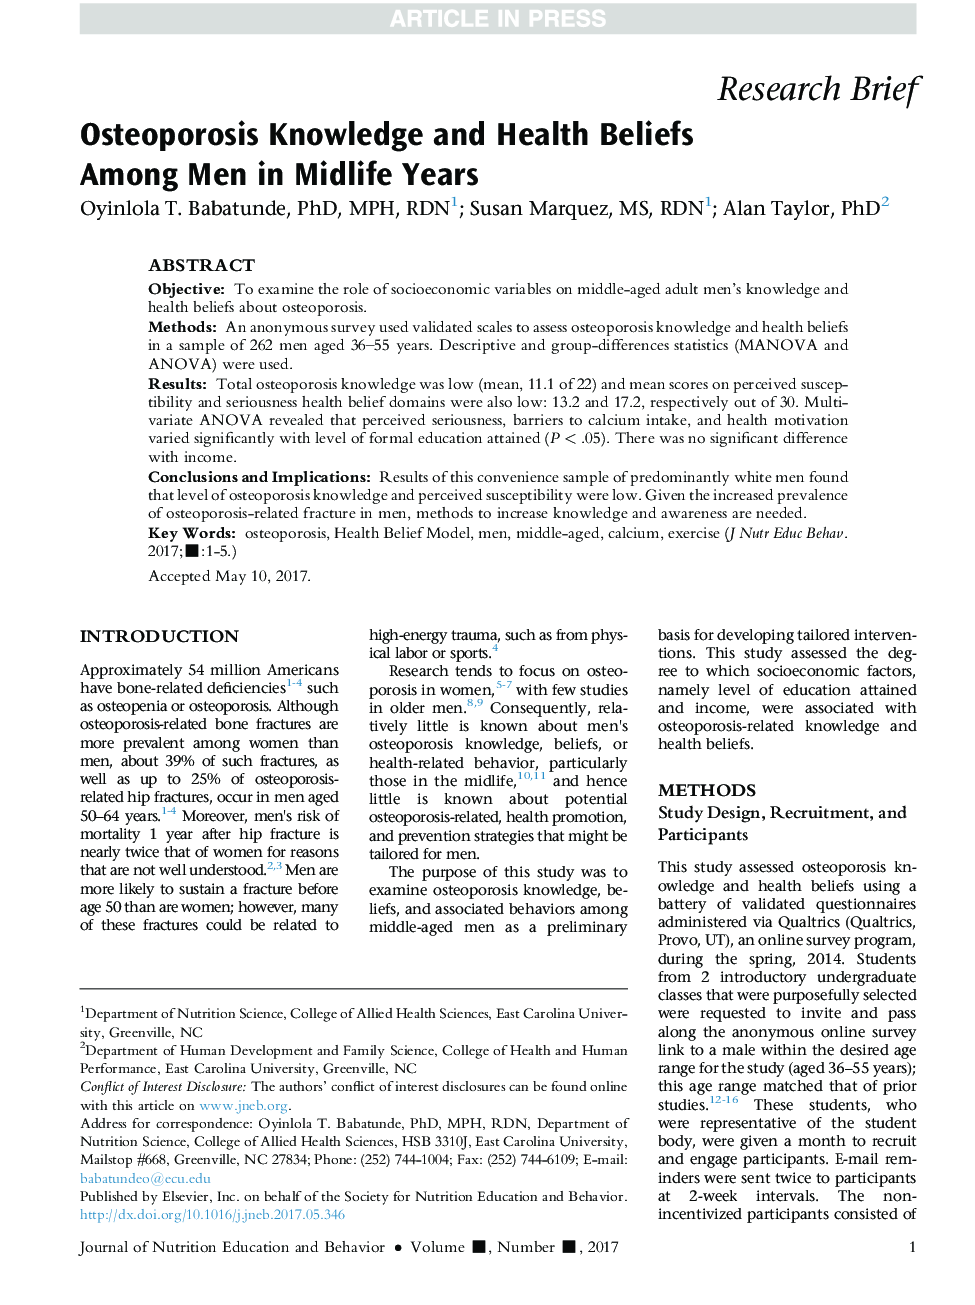 Osteoporosis Knowledge and Health Beliefs Among Men in Midlife Years